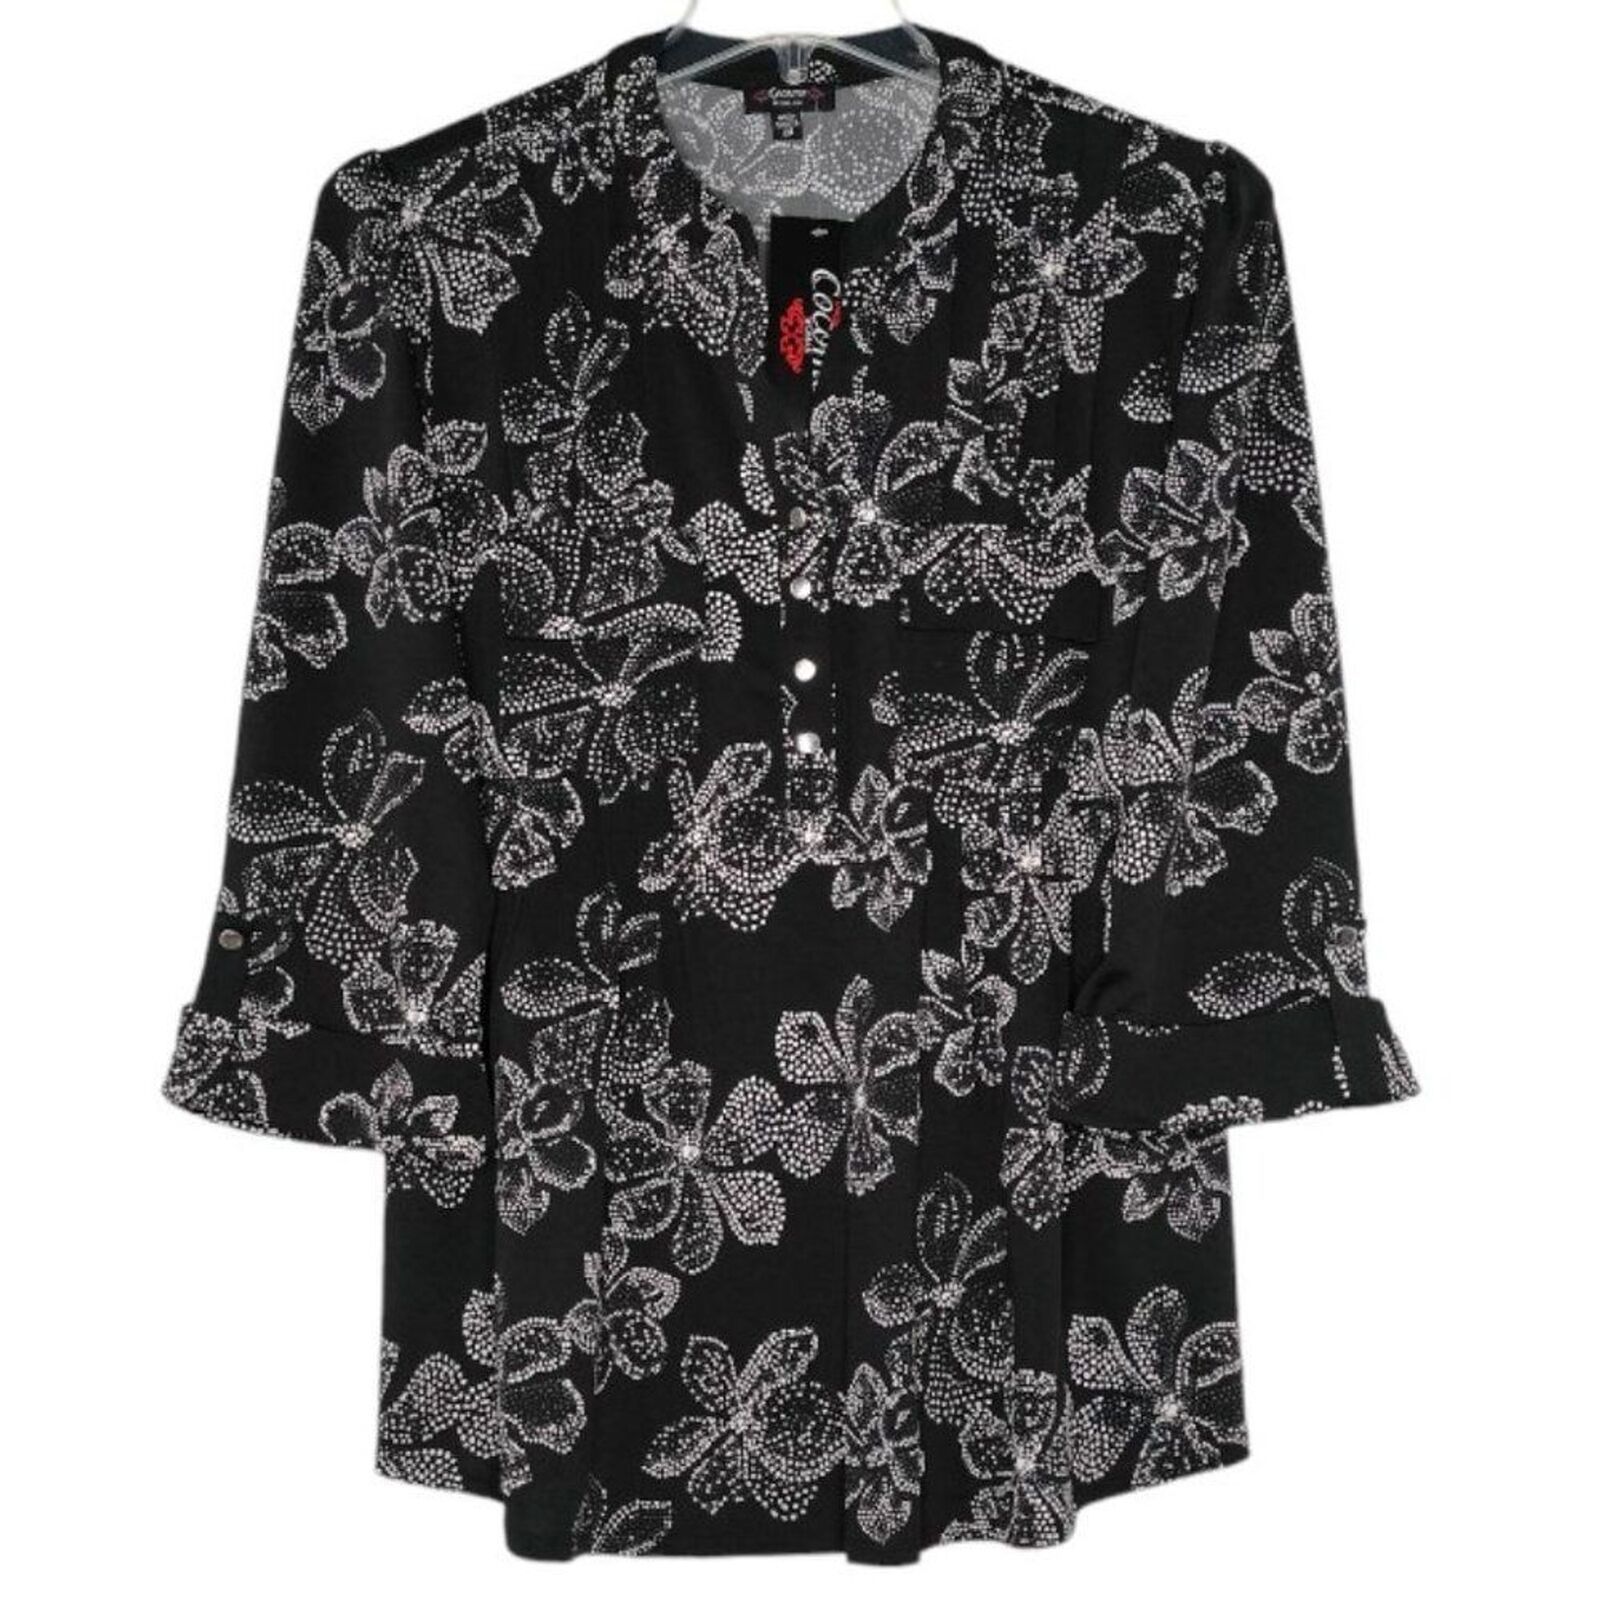 Primary image for NWT Cocomo Plus Size 2X Black & White Floral Print Pintuck 3/4 Sleeve Top